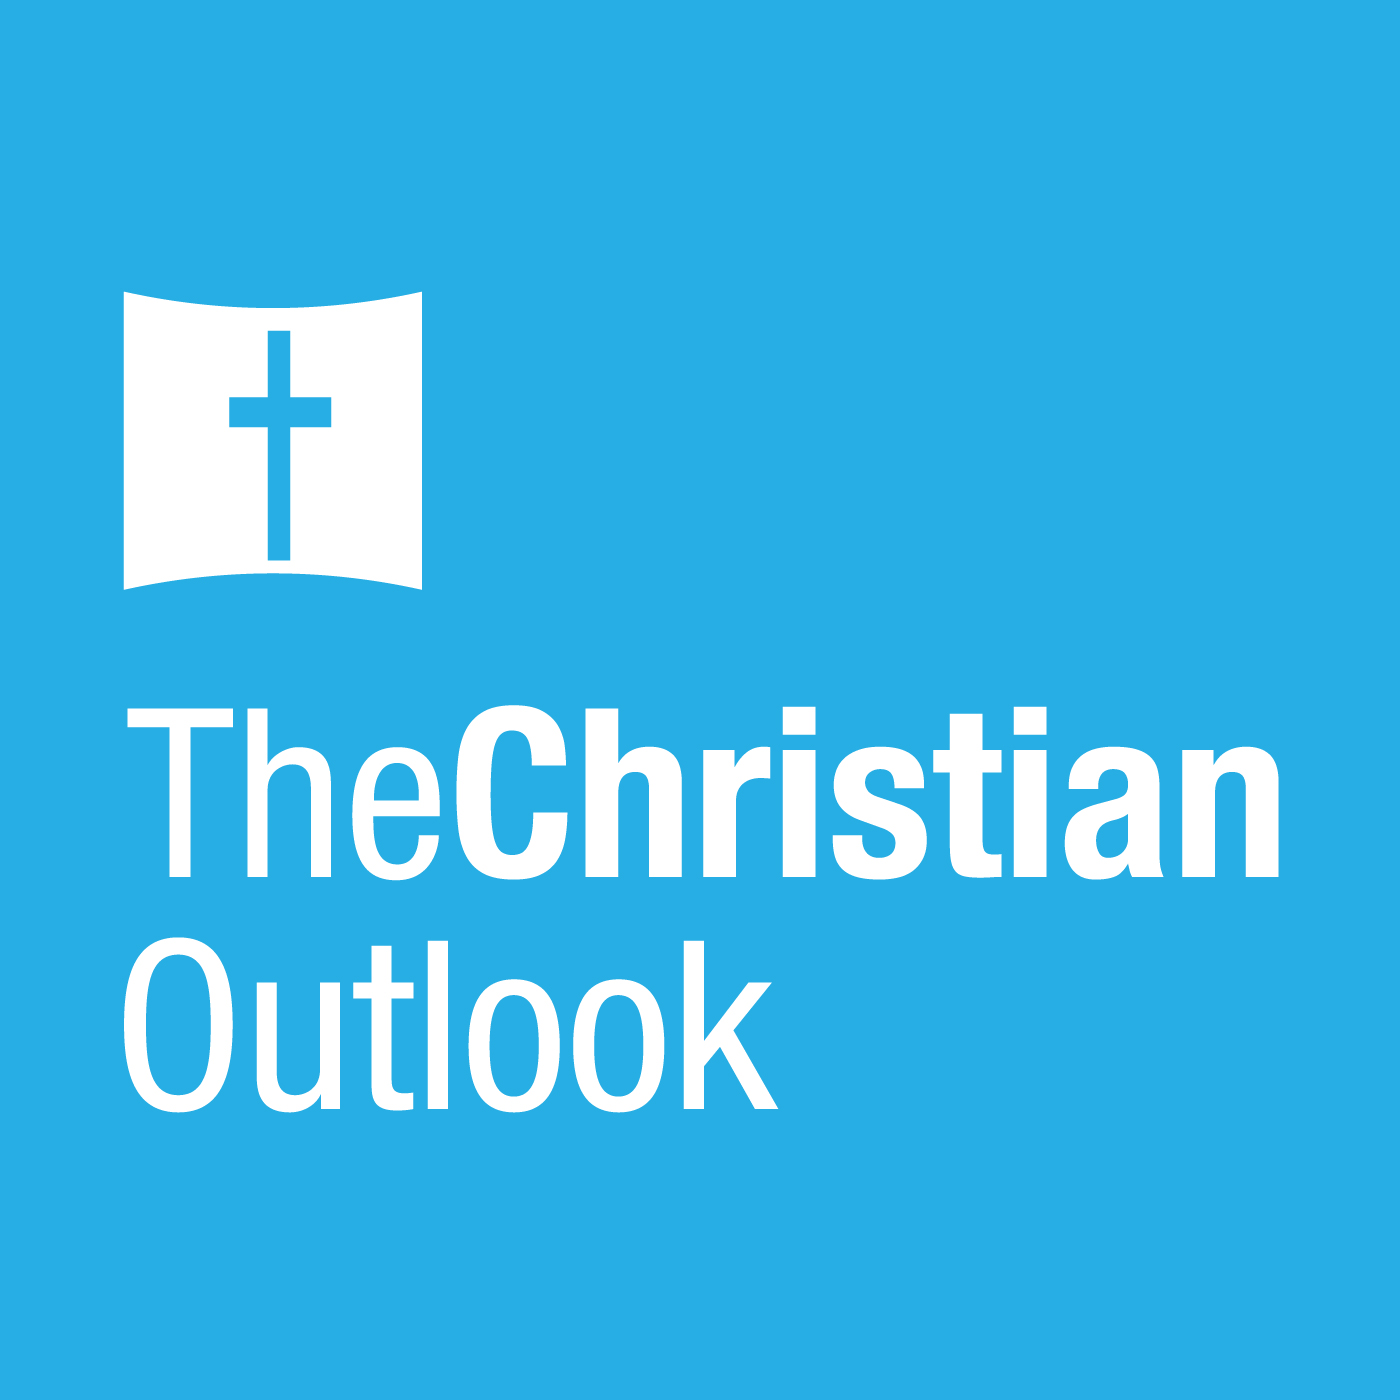 Christian Outlook 11/7/15: "We Cannot Be Silent"